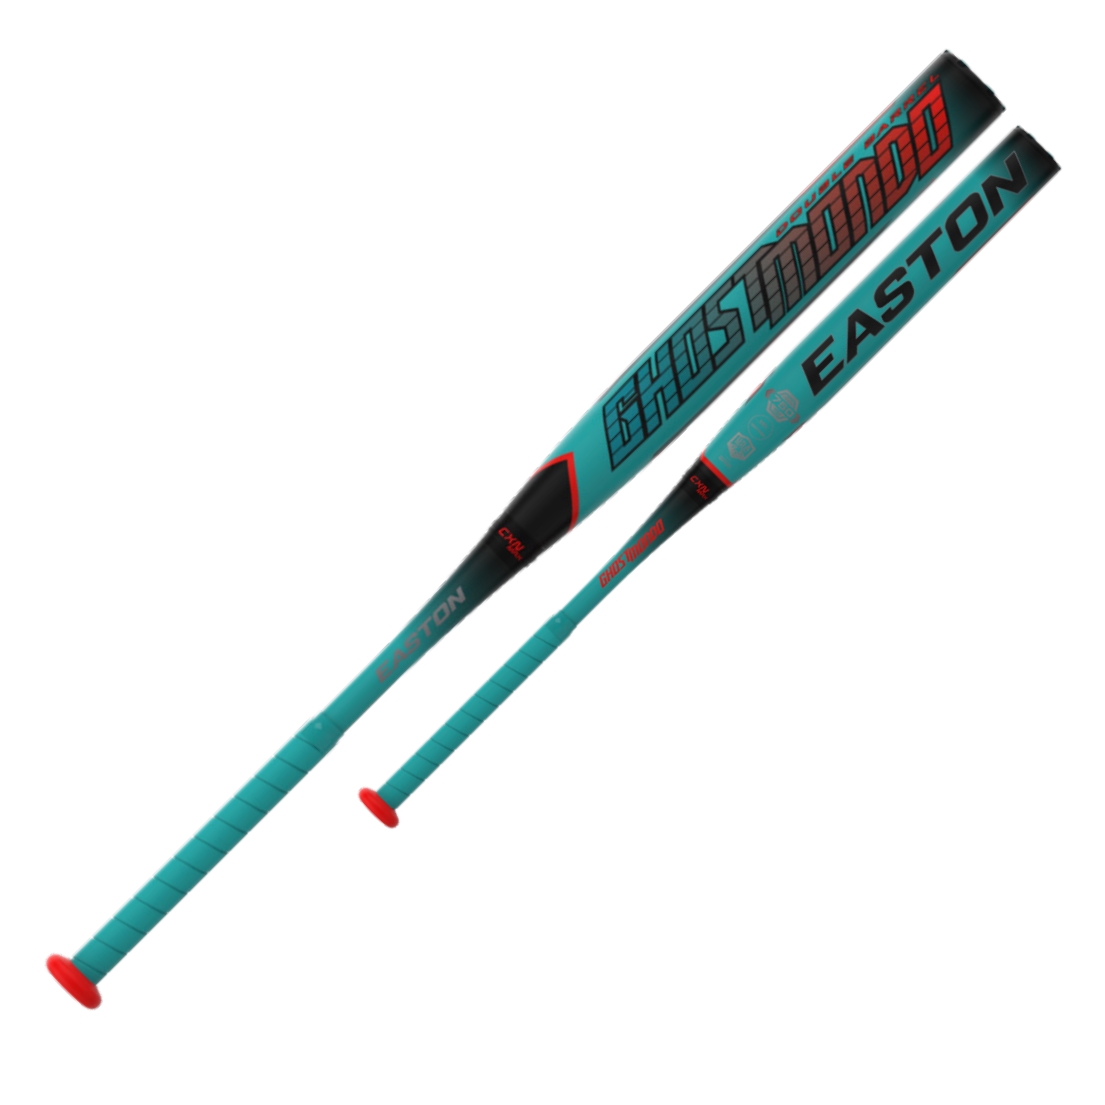 easton-ghostmondo-ext-12-5-load-usa-softball-bat-34-inch-26-oz SP22GHML-3426 Easton 628412361566 <p>Double Barrel Technology – Delivers soft barrel compression and hot performance